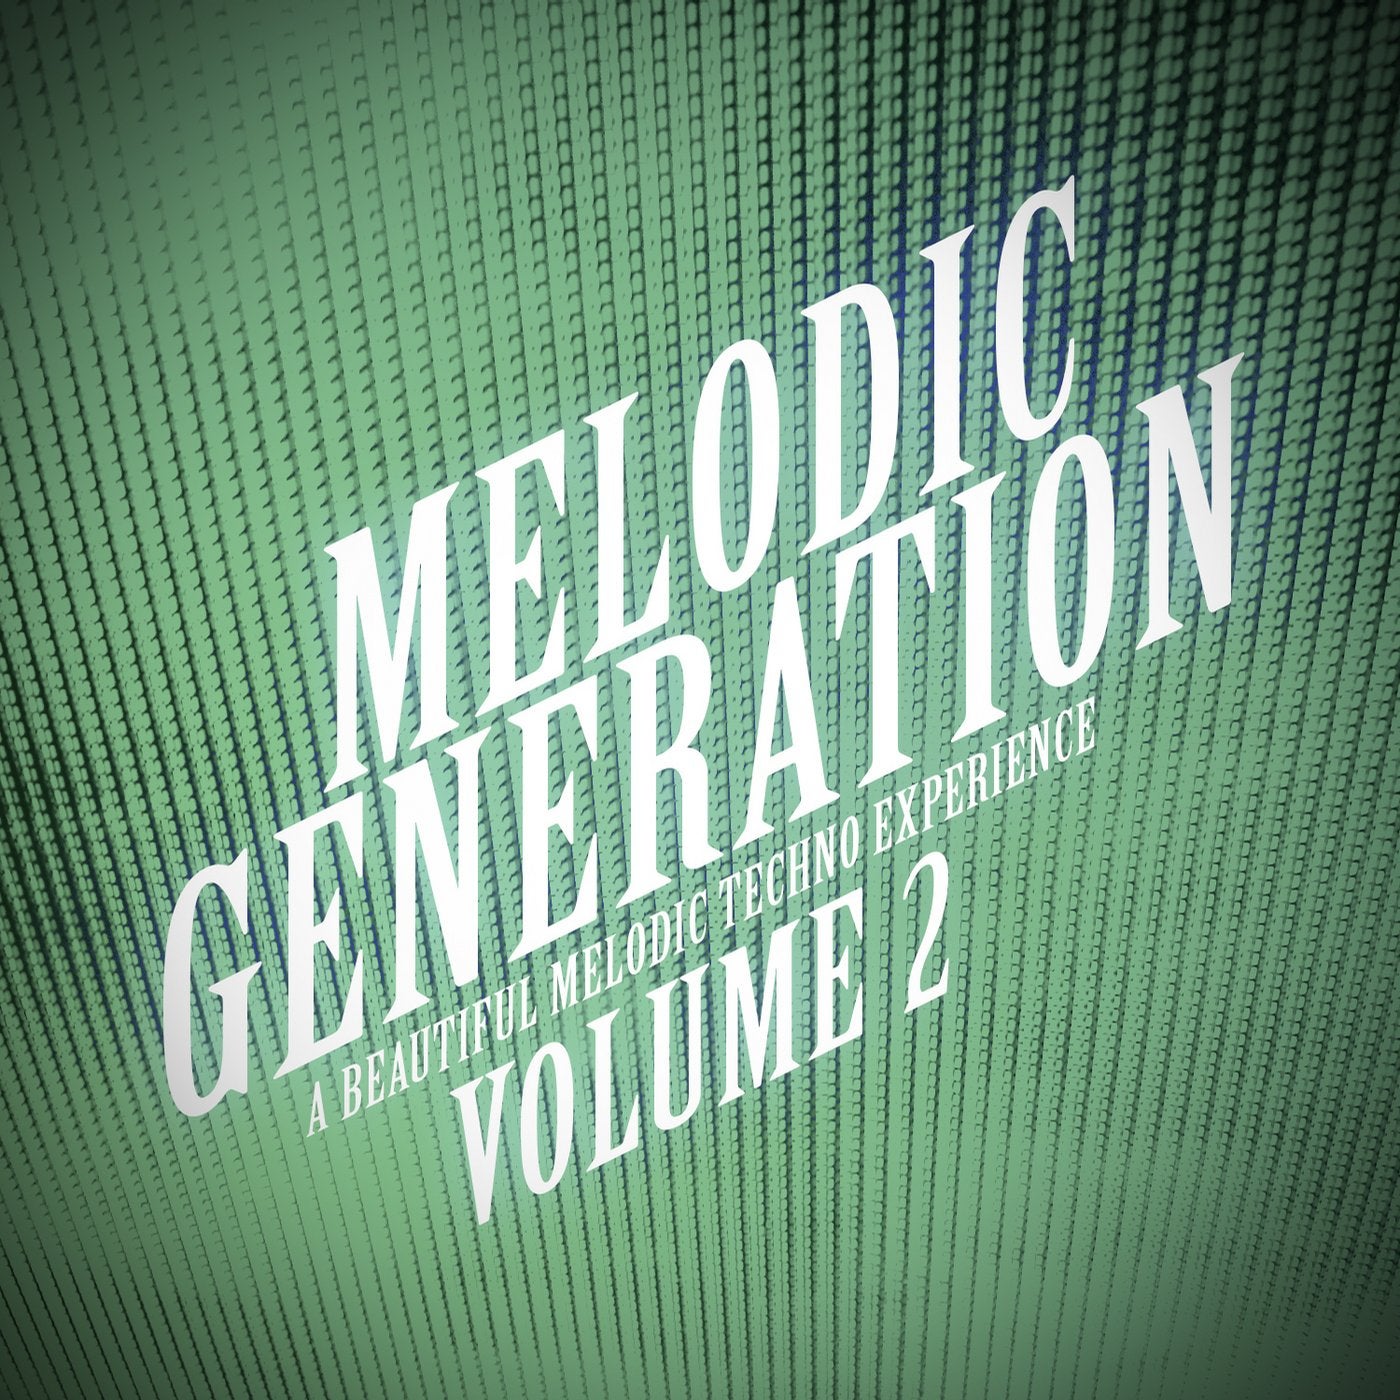 Melodic Generation, Vol. 2 - The Melodic Techno Collection